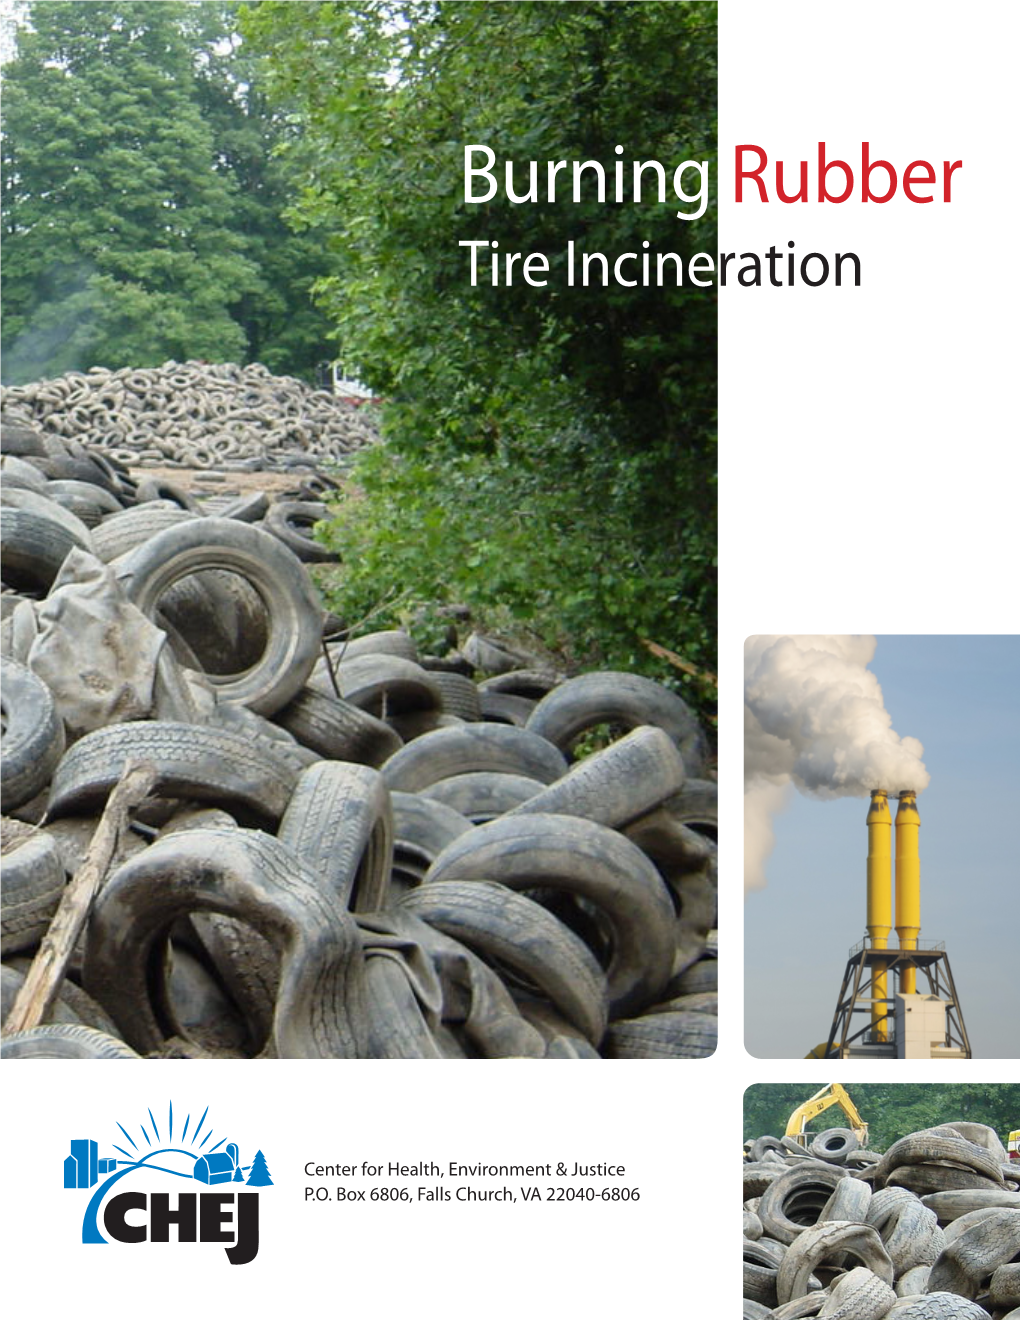 Burning Rubber Tire Incineration